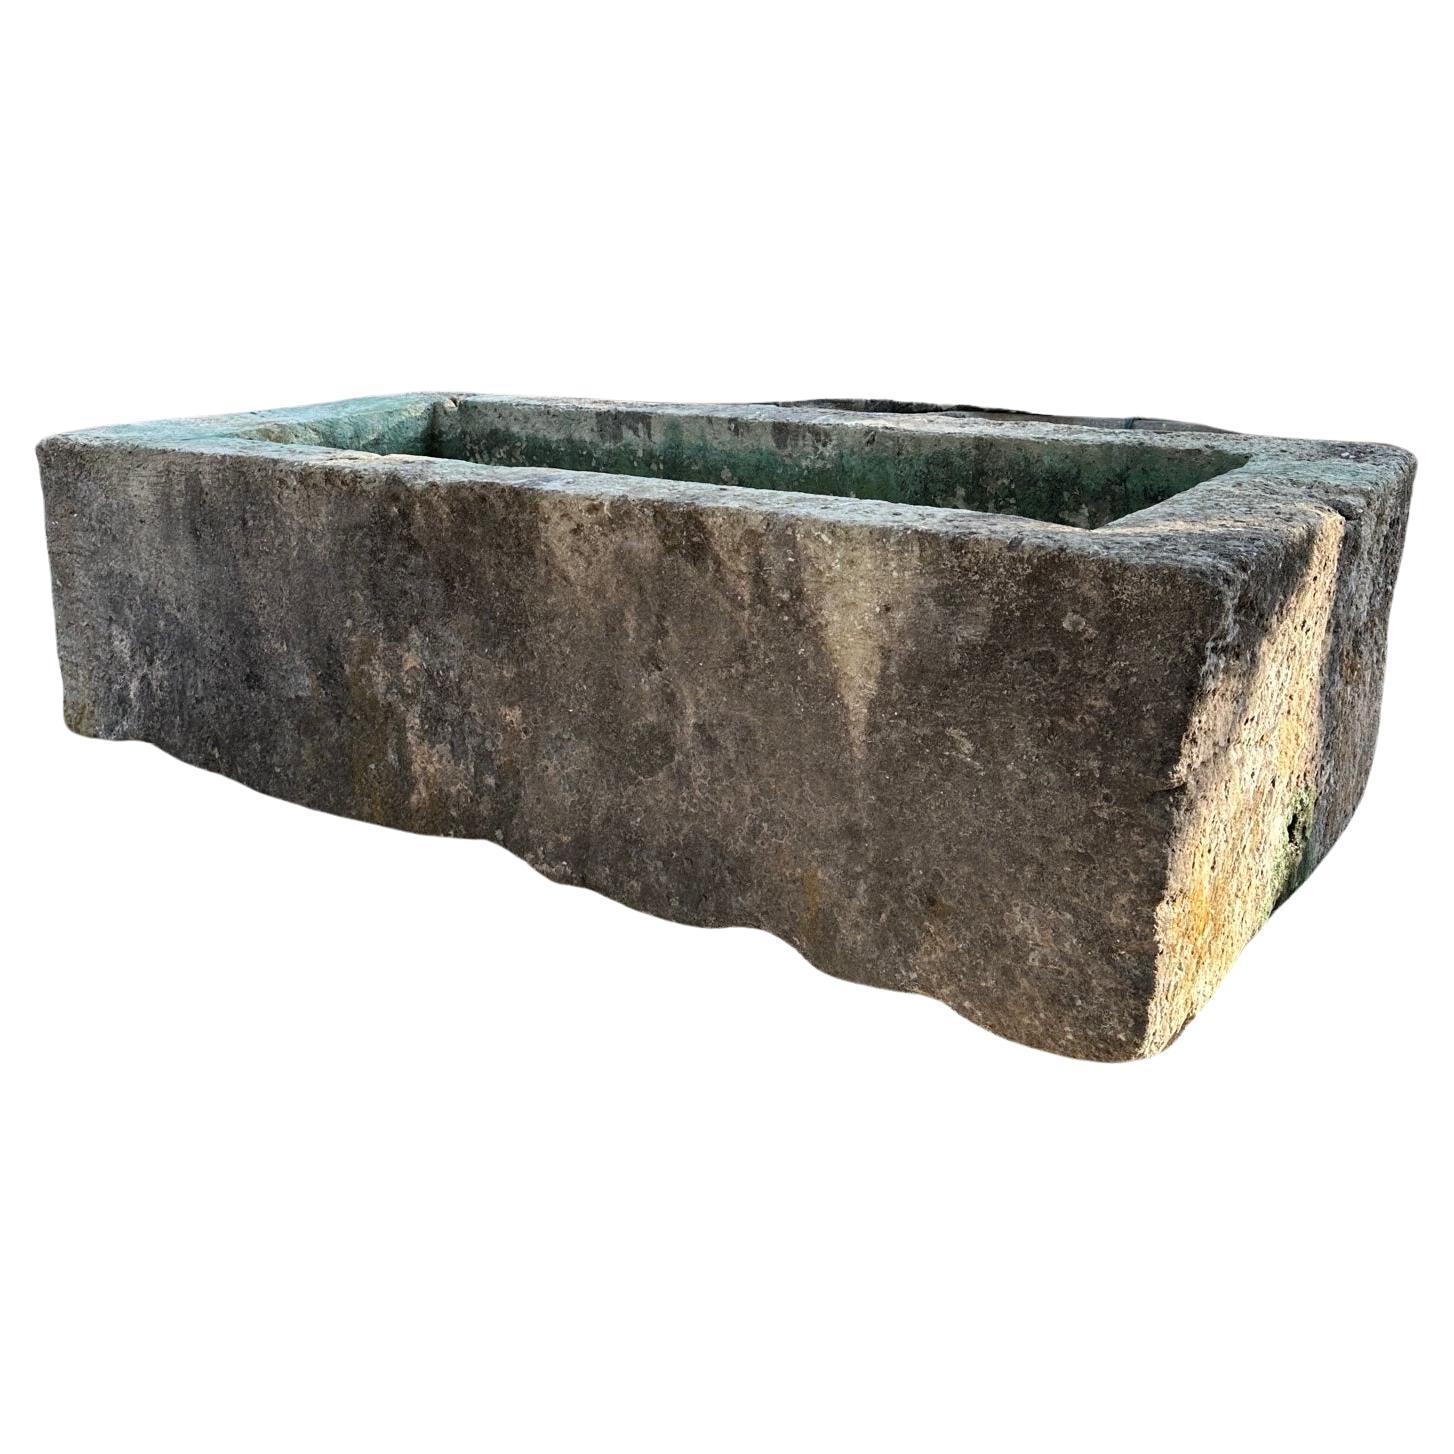 Hand carved stone Container Fountain Basin Tub planter Firepit Trough antique LA. Exquisite Very Large 17th century water fountain basin of hand carved stone. This trough could be installed with a simple bronze spout or a carved stone fountain head,